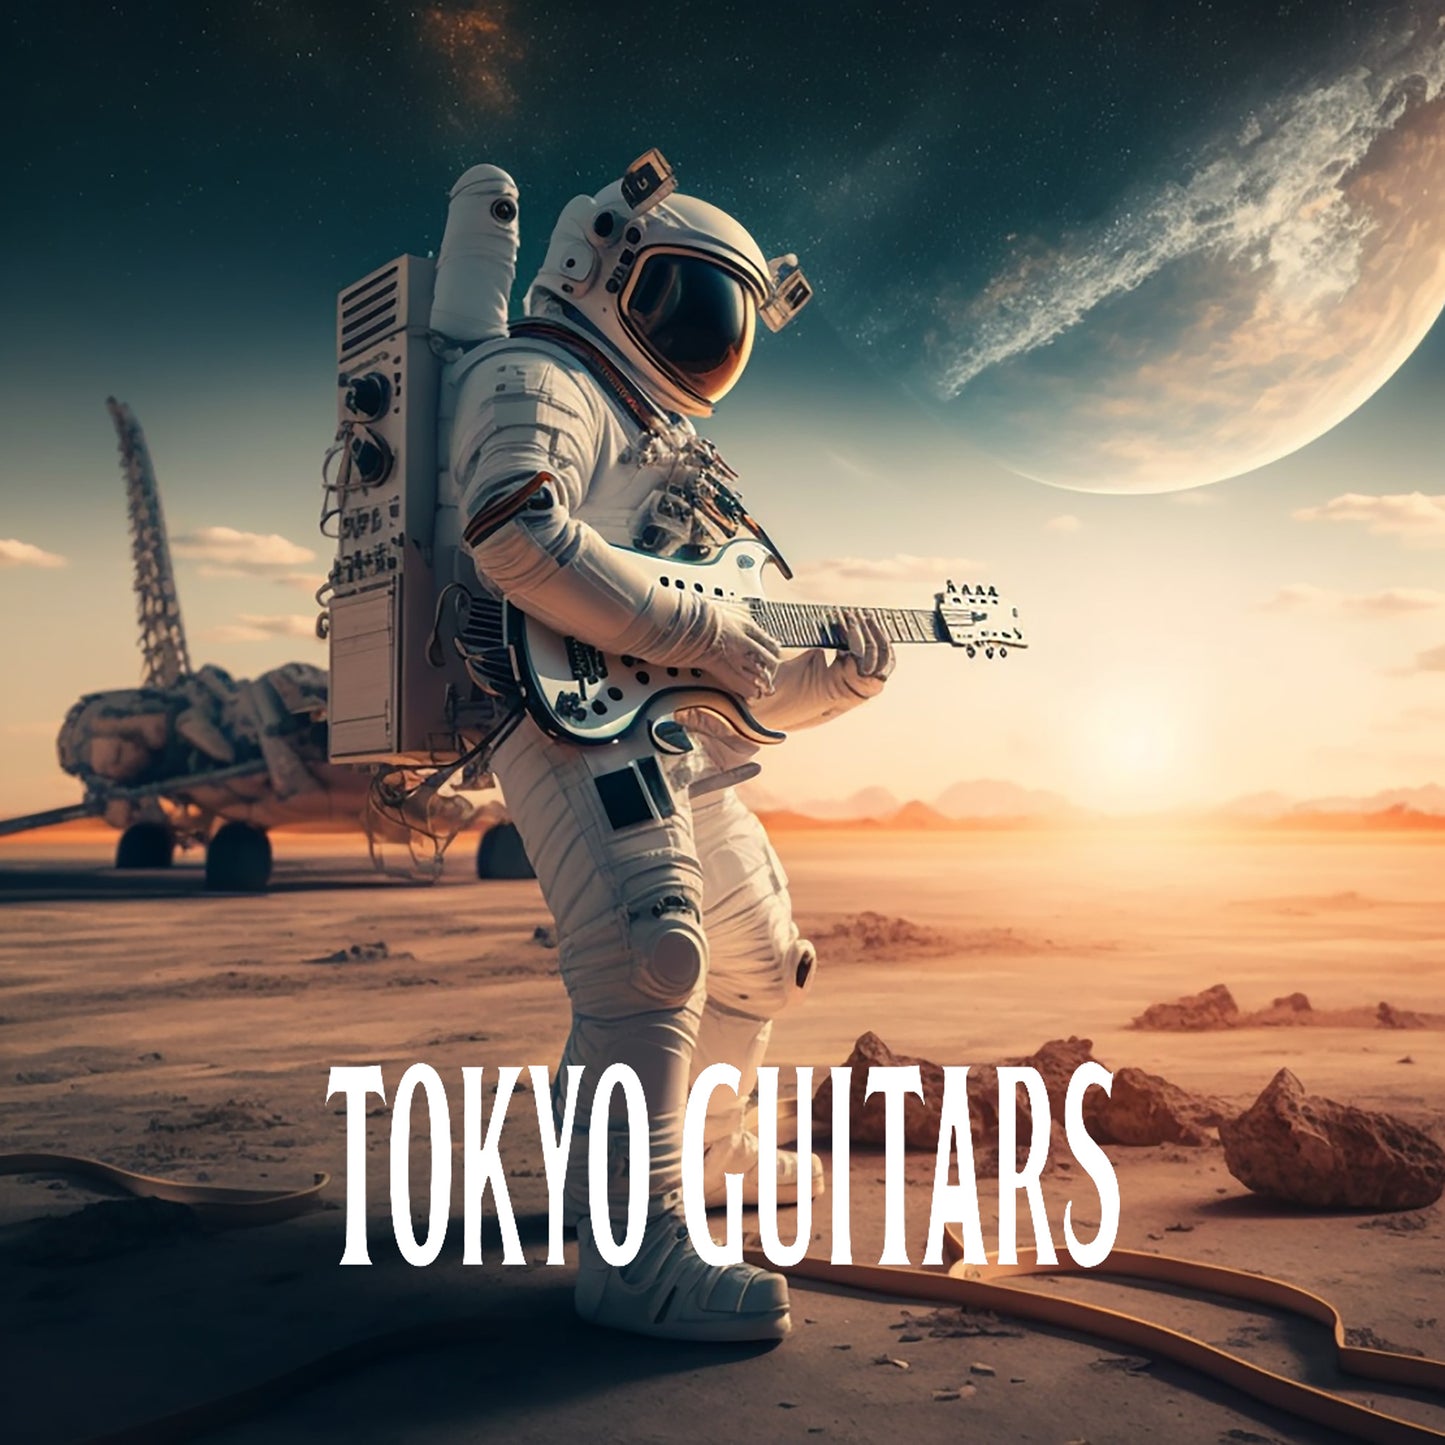 First Landed On The Unknown Planet【TOKYO GUITARSをサポート】